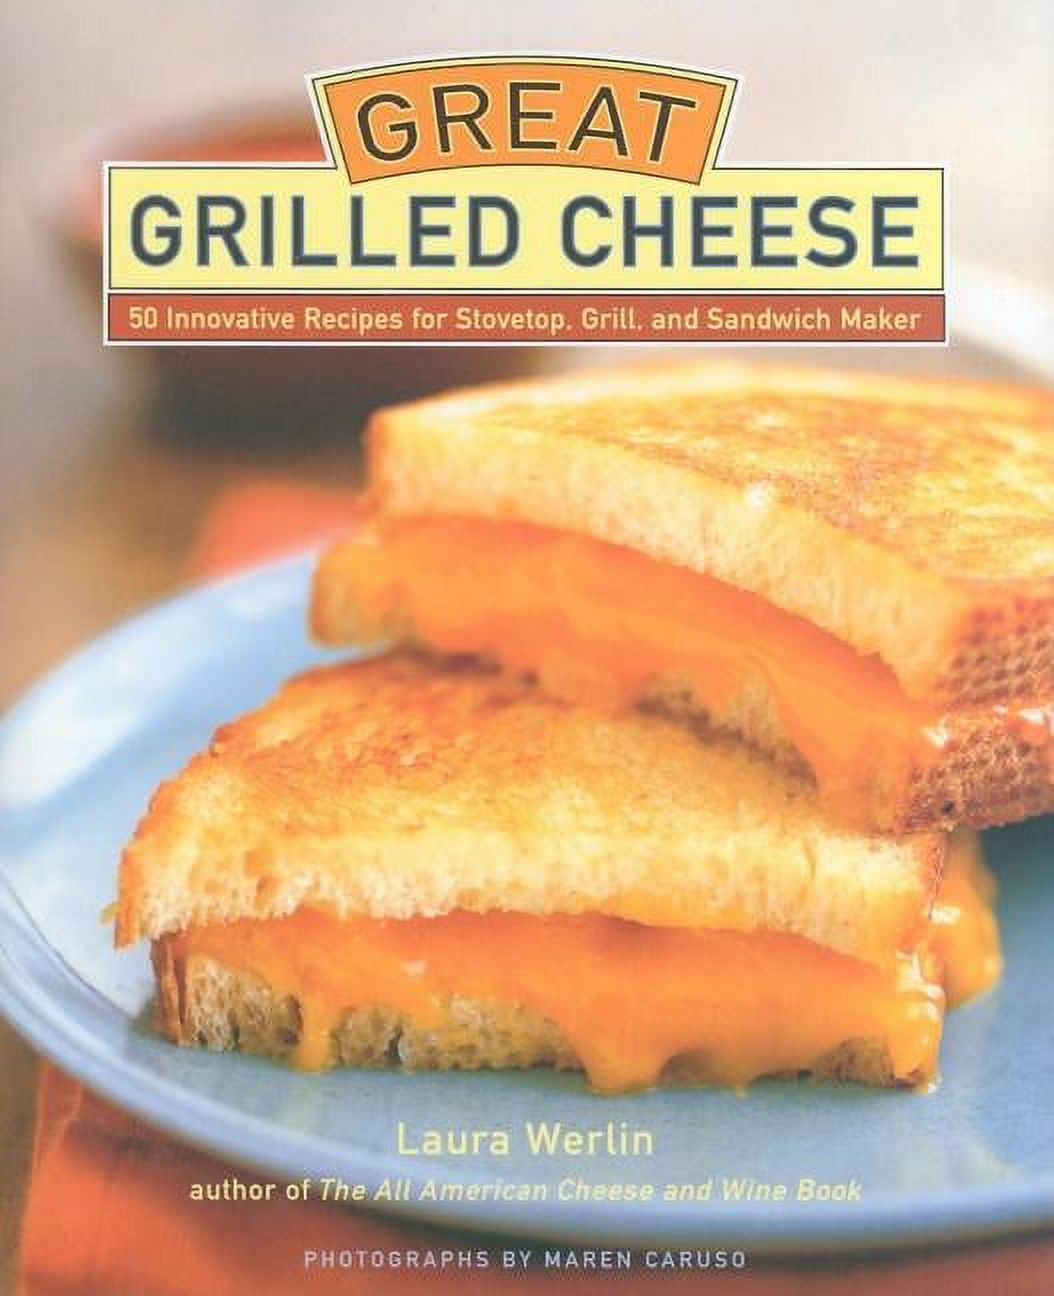 Great Grilled Cheese : 50 Innovative Recipes for Stovetop, Grill, and Sandwich Maker (Hardcover) - image 1 of 1